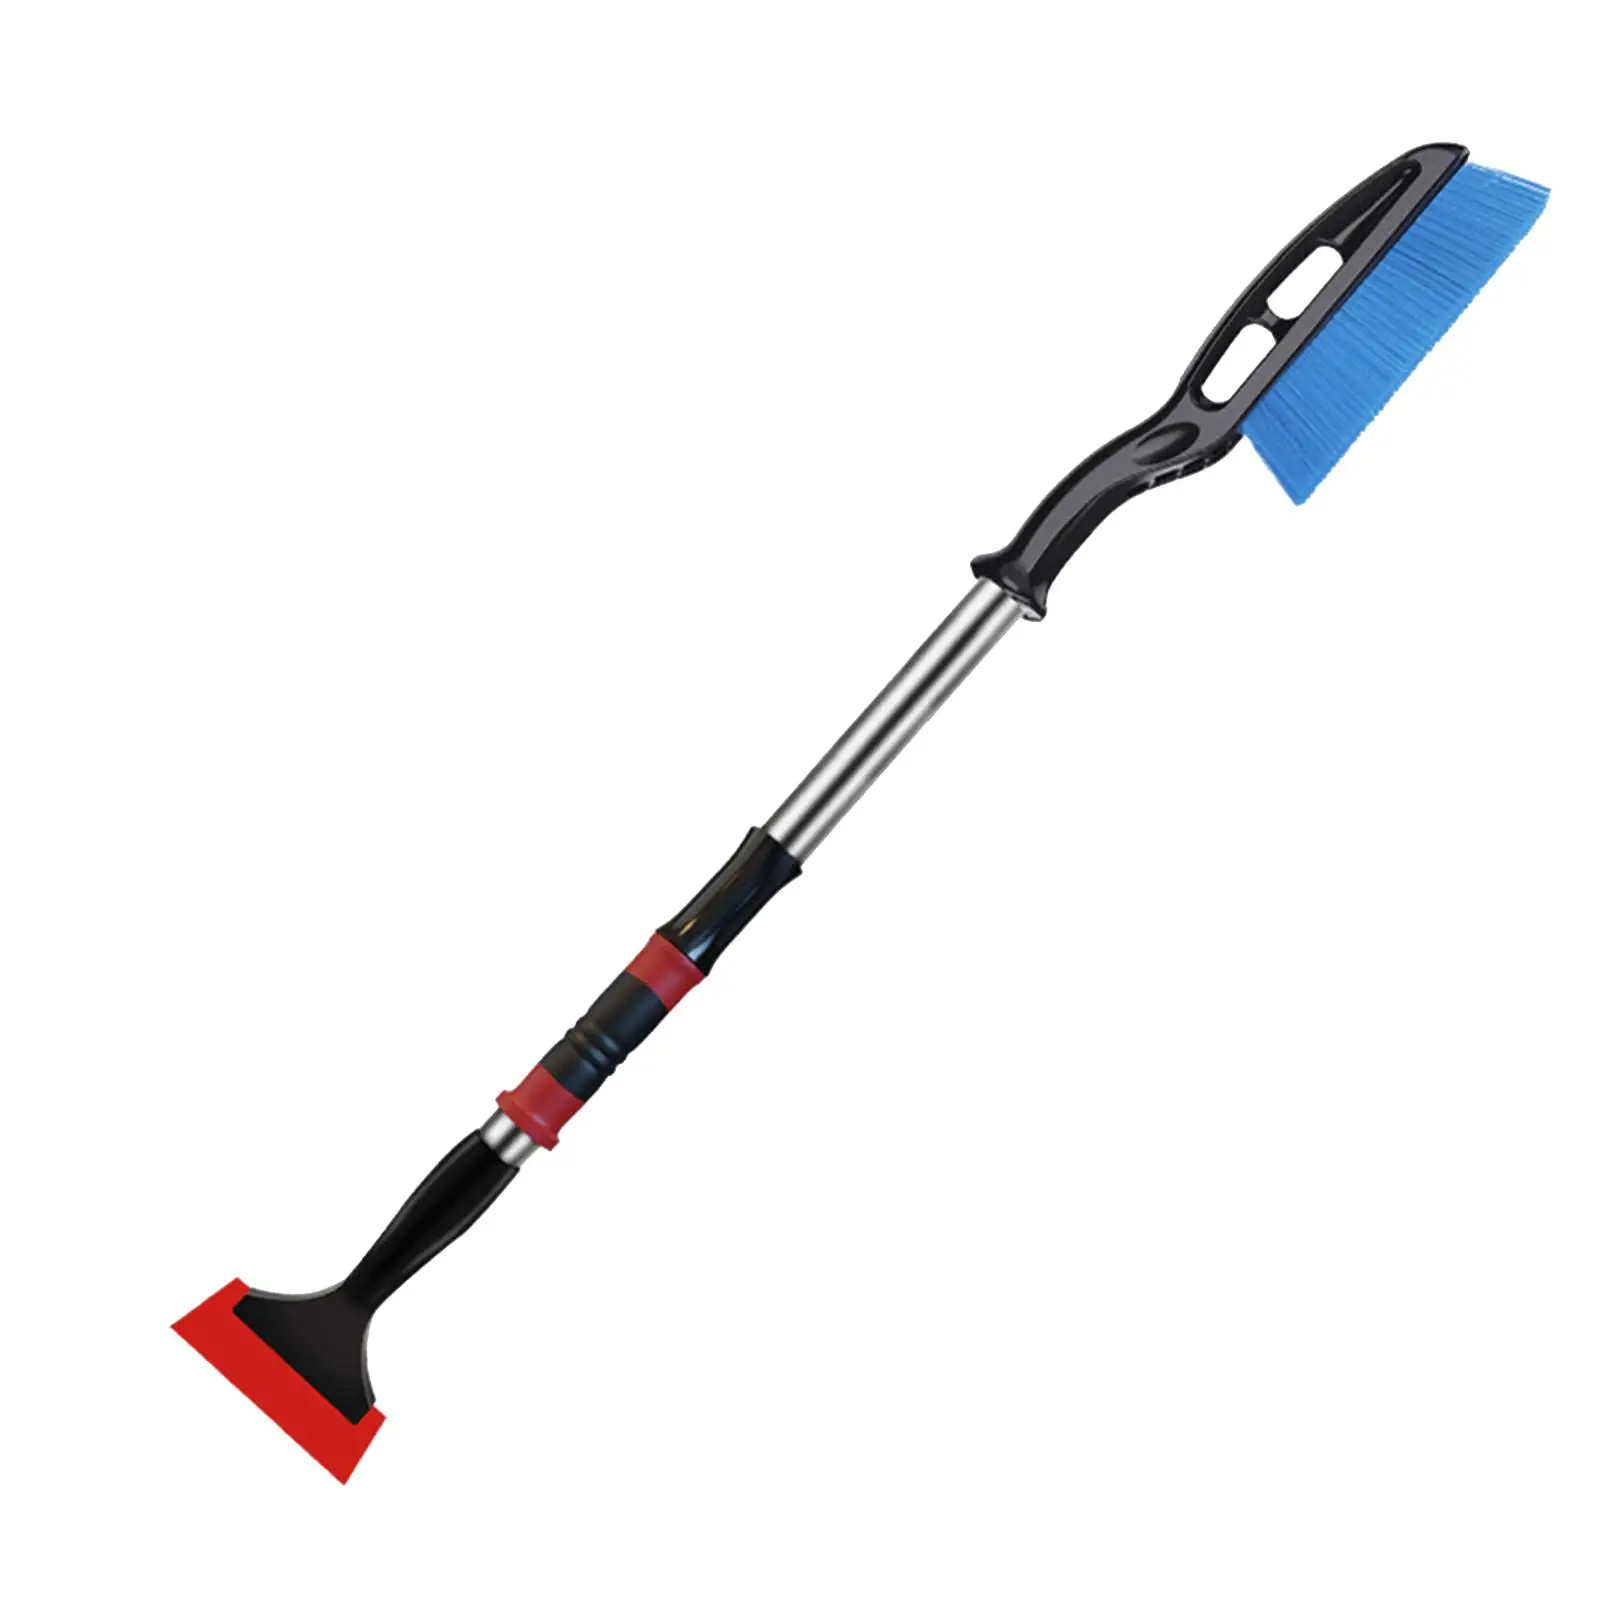 Car Snow Removal Brush Shovel Lightweight Winter for Auto SUV Vehicles